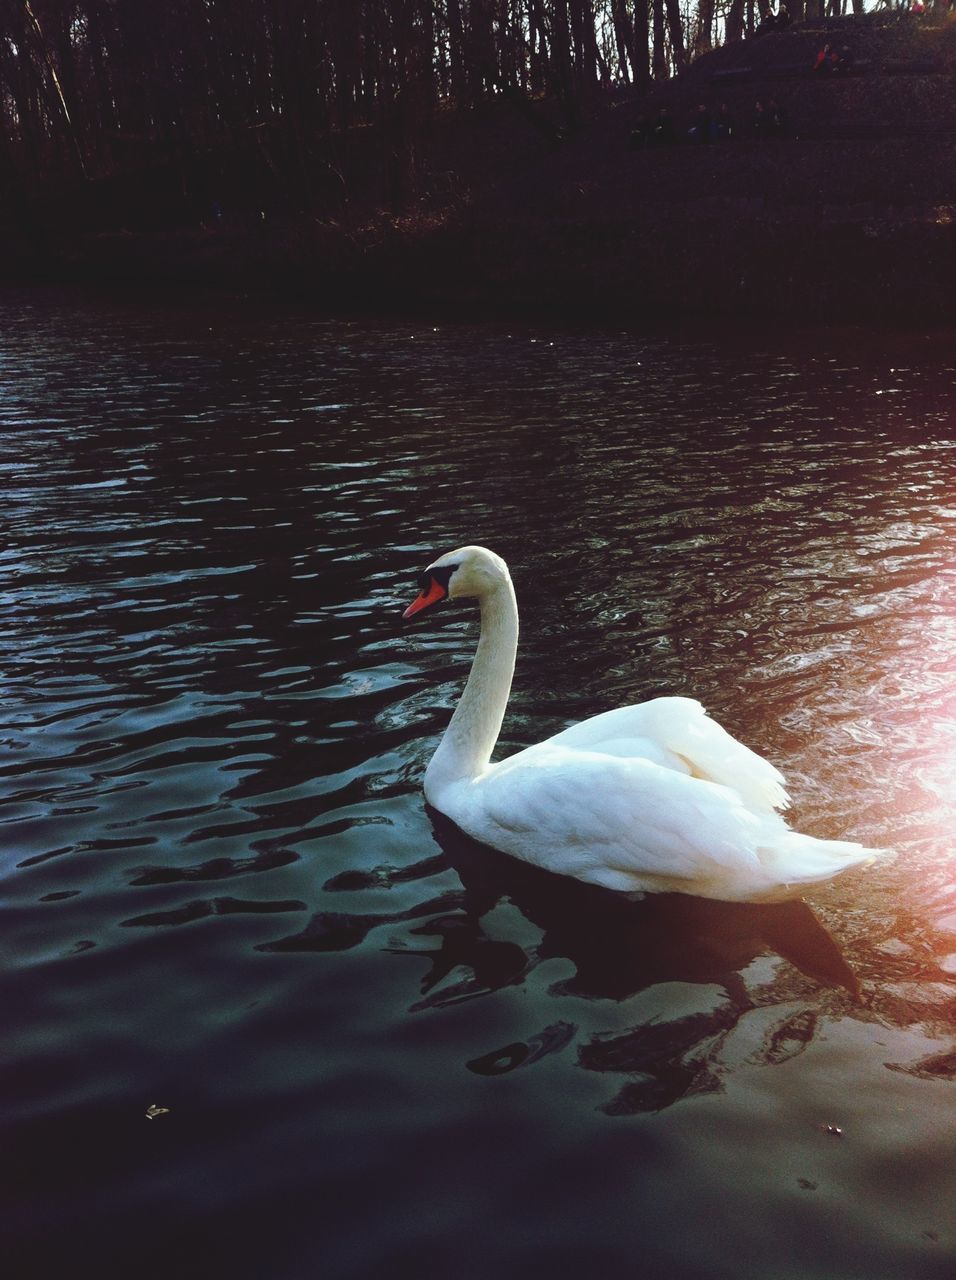 water, swan, lake, animal themes, bird, wildlife, animals in the wild, swimming, waterfront, reflection, rippled, one animal, nature, floating on water, beauty in nature, water bird, tranquility, outdoors, white color, no people